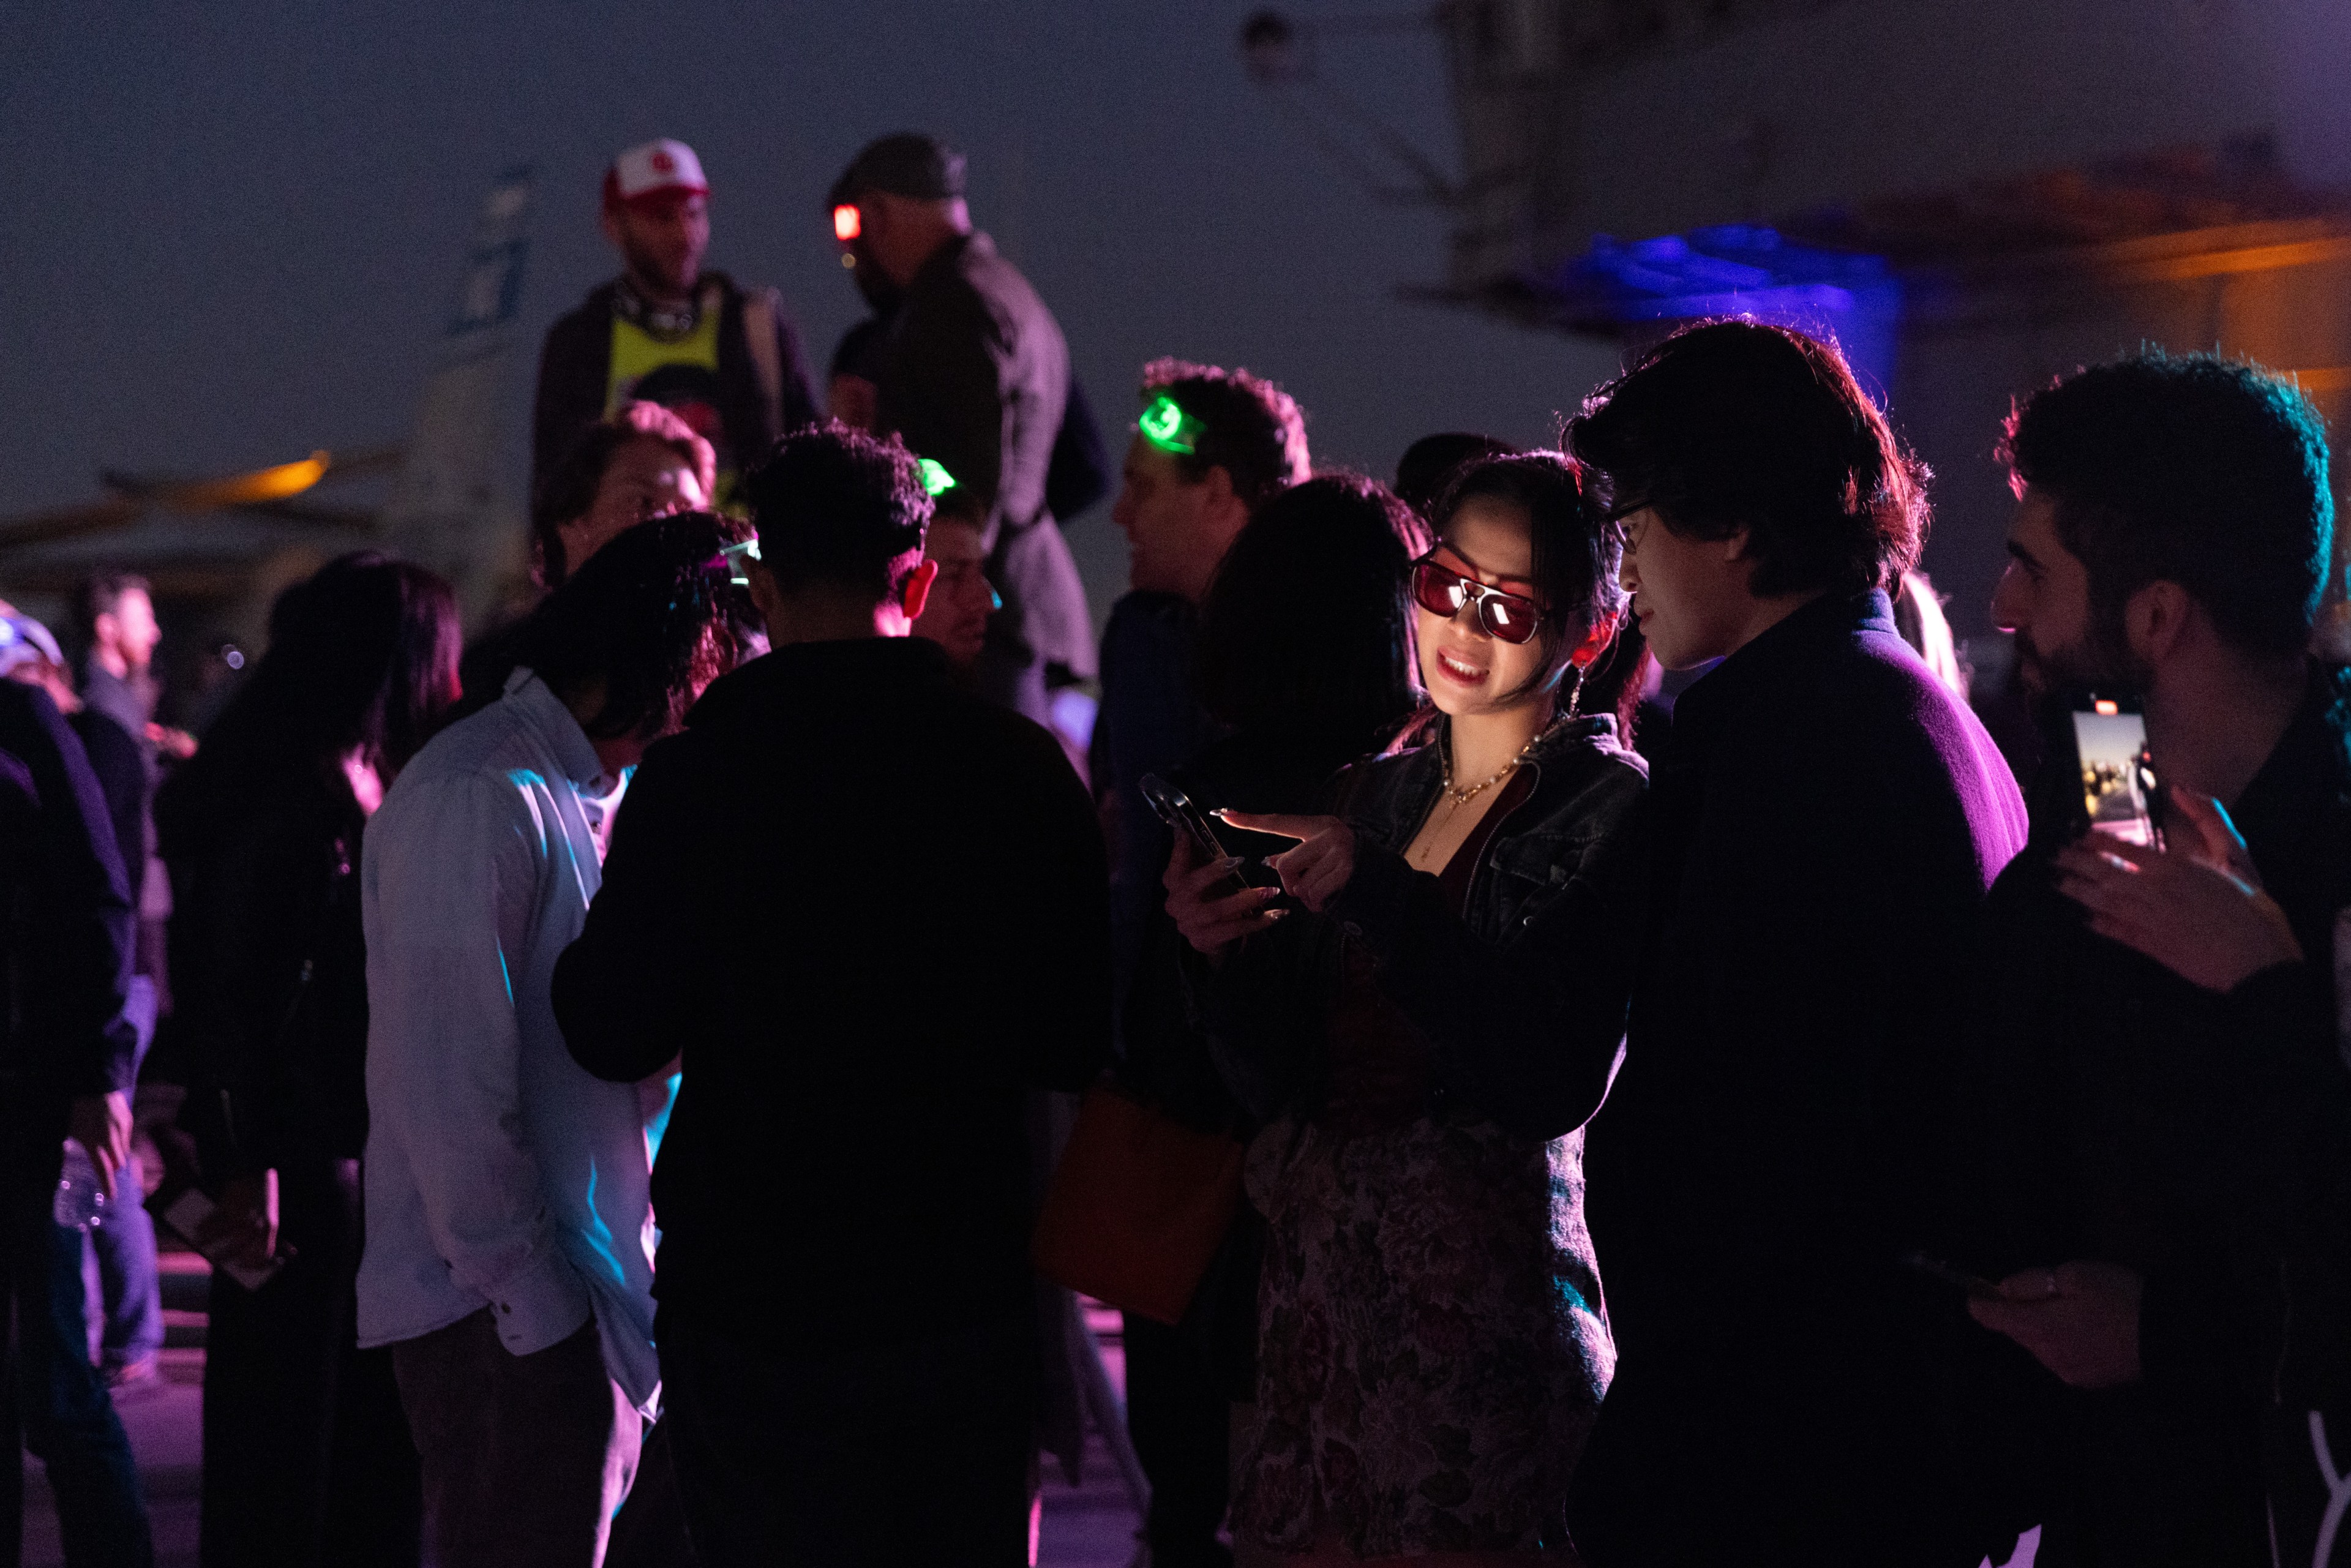 A group of people is gathered at an evening event, with many wearing sunglasses and some illuminated by colorful lights. A couple appears to be sharing something on a phone.